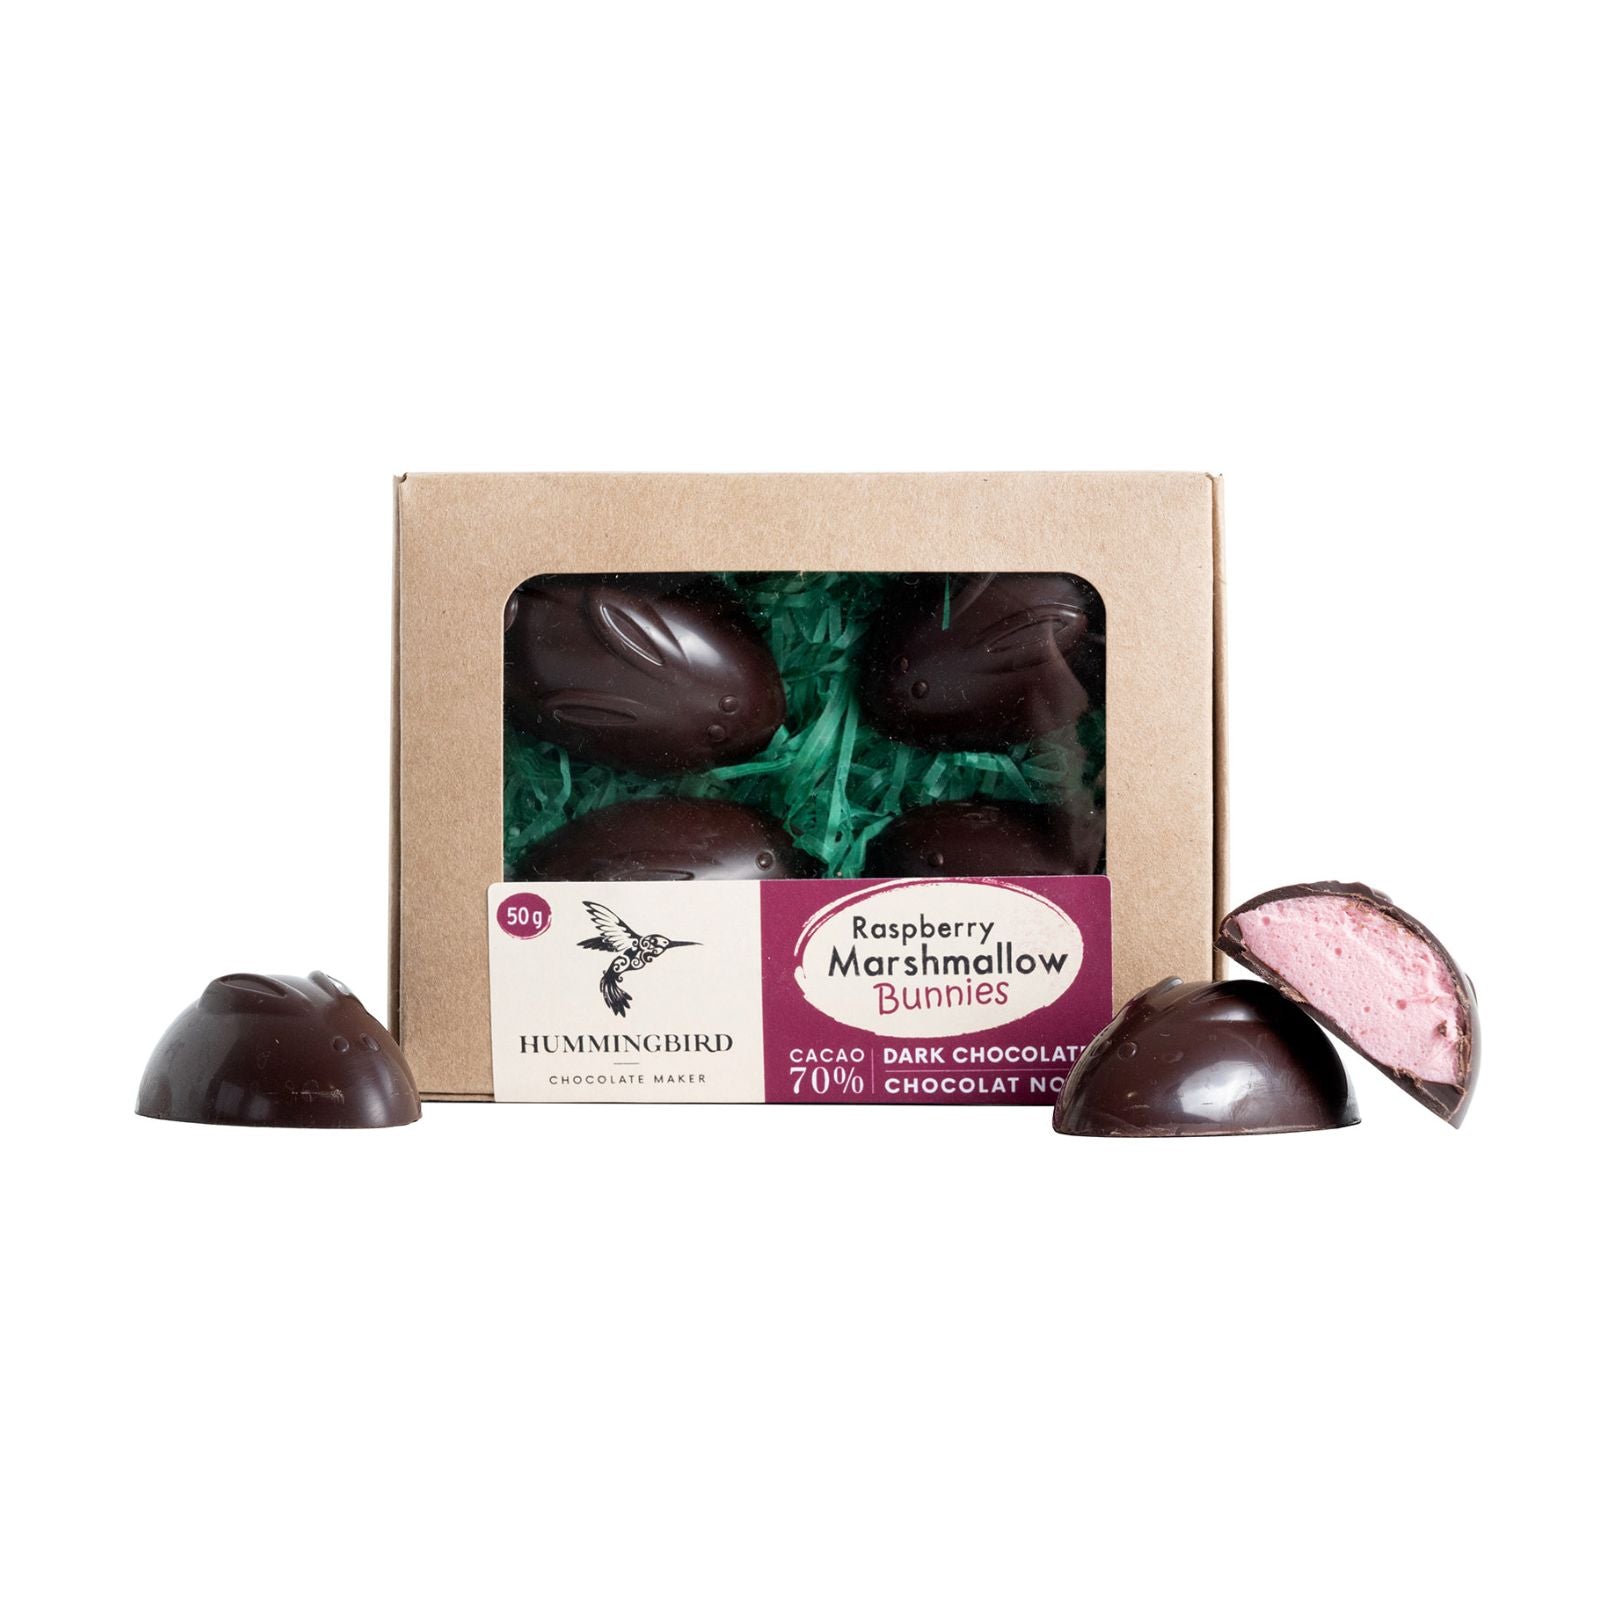 Cross-section of Raspberry Marshmallow Bunnies in front of packed product revealing beautiful pink marshmallow inside dark chocolate bunnies